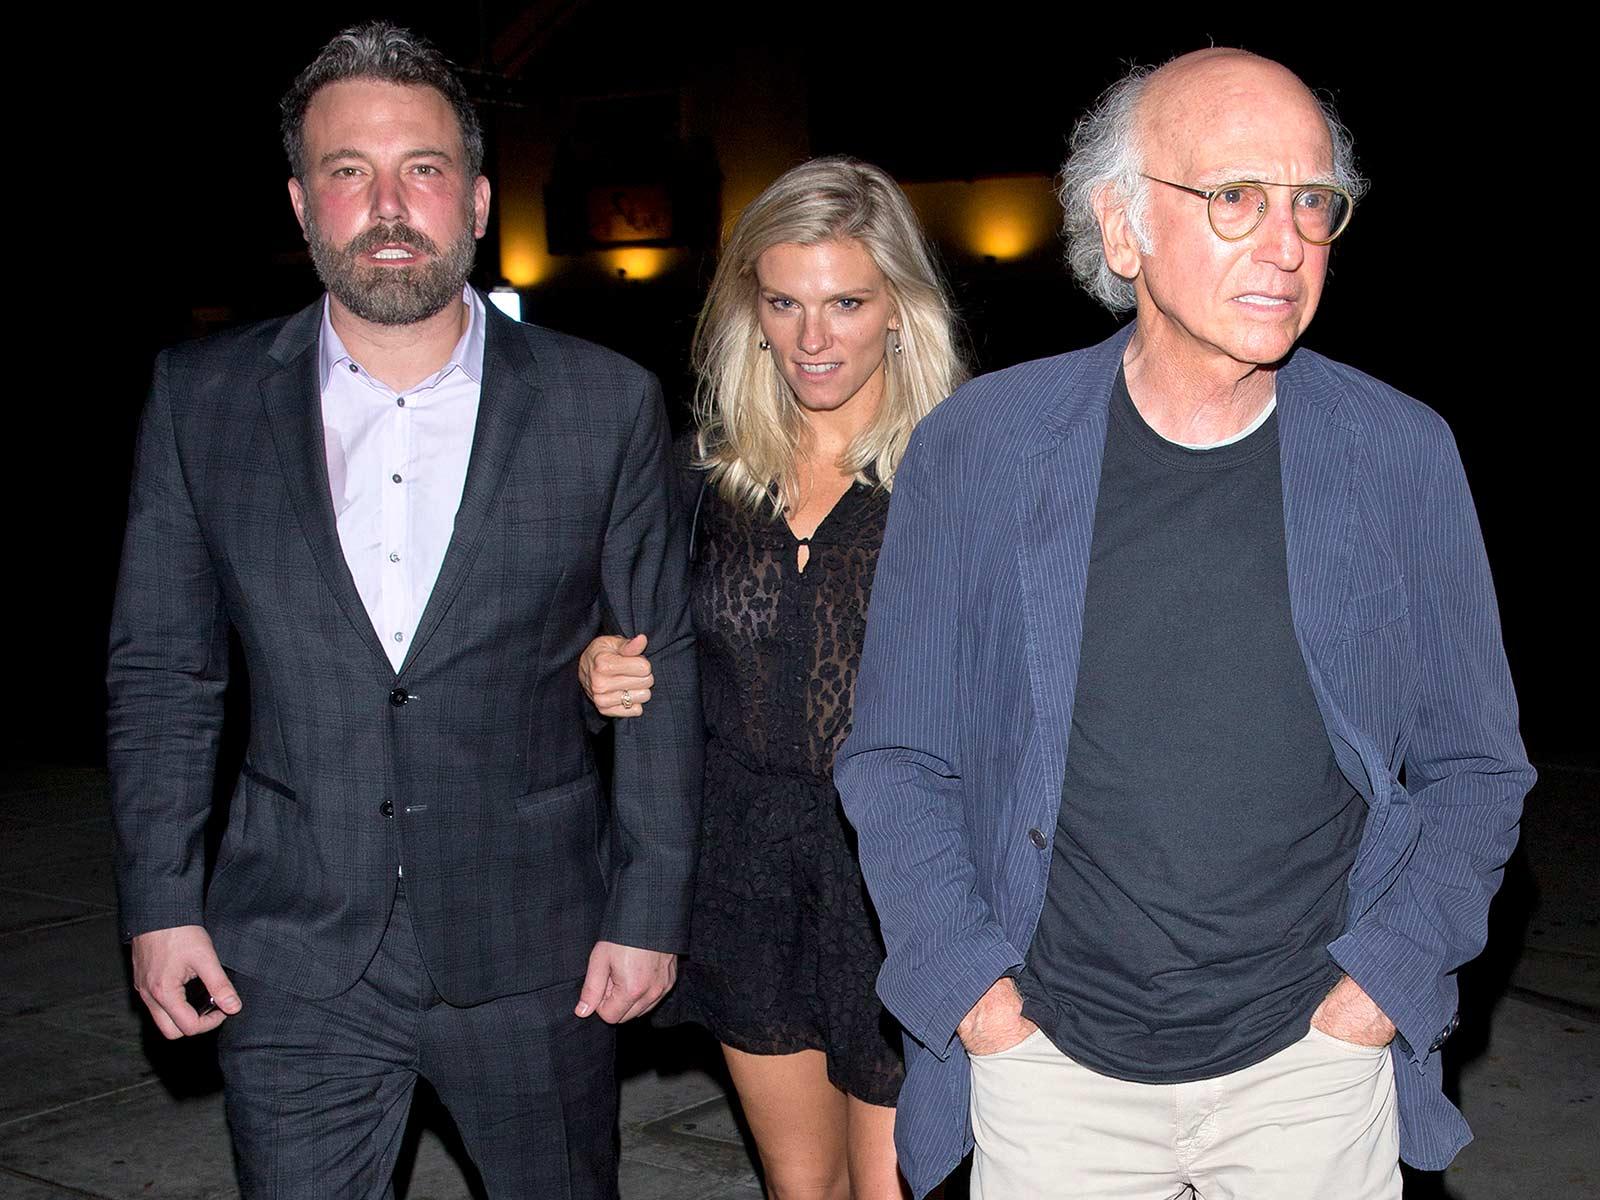 Larry David Is The Third Wheel You Didn’t Know You Needed